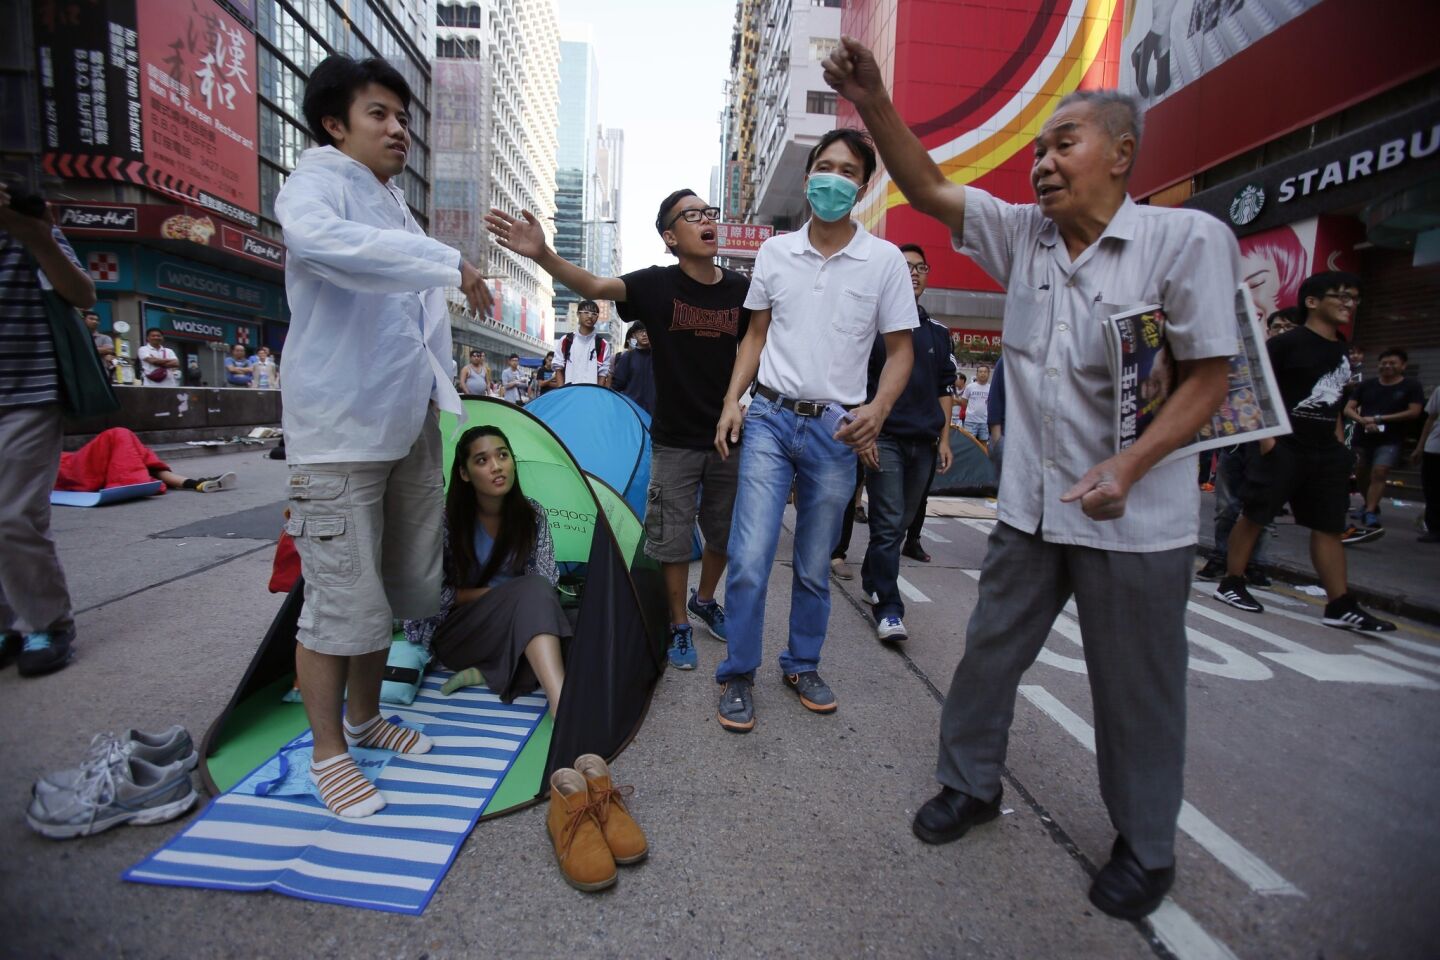 An older man shares his opposing views with pro-democracy student protesters in Mong Kok.